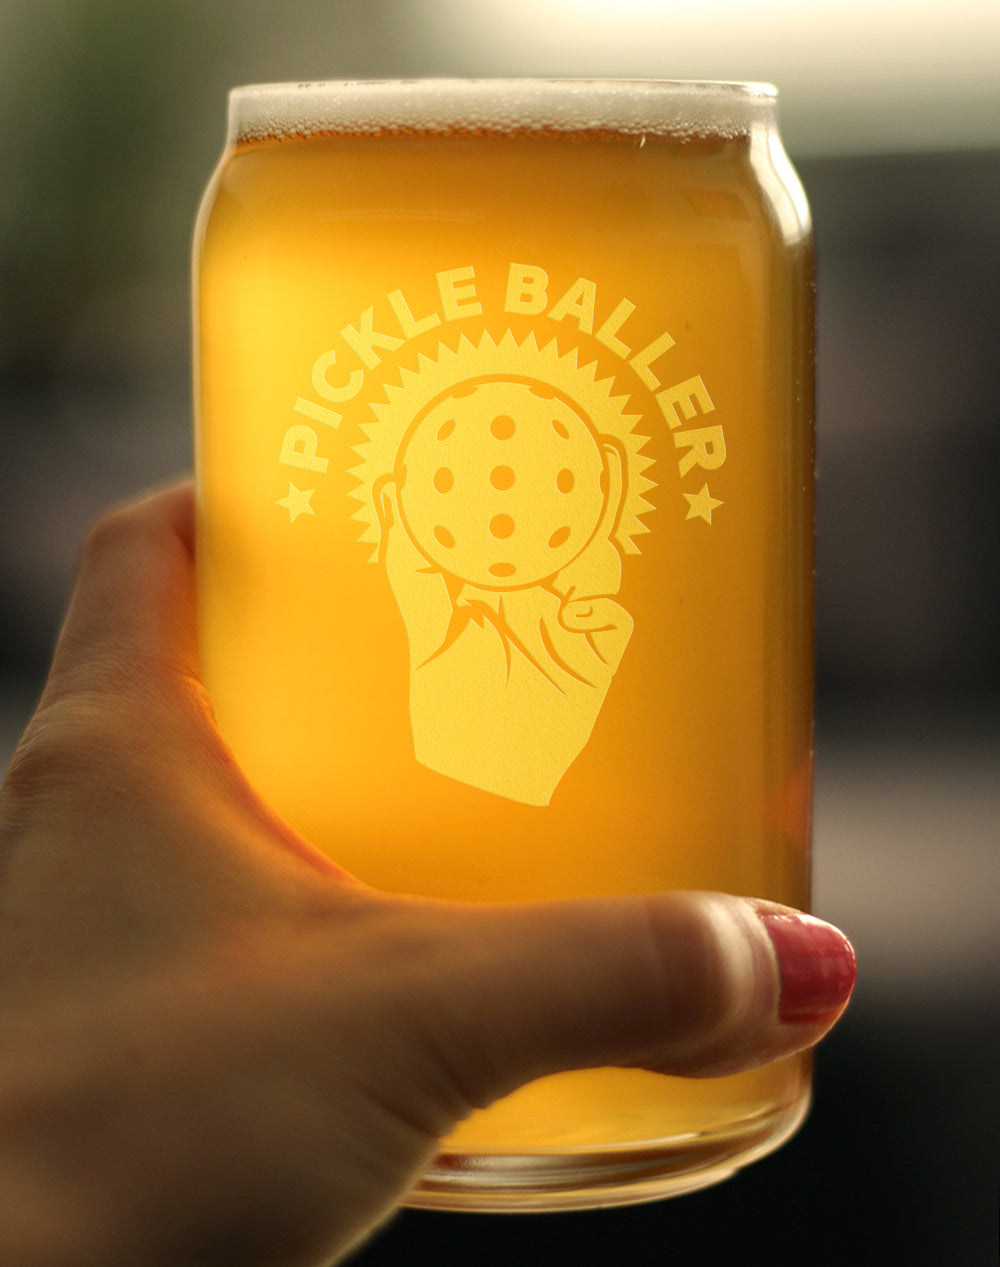 Pickleballer - Beer Can Pint Glass - Funny Pickleball Themed Decor and Gifts - 16 oz Glasses